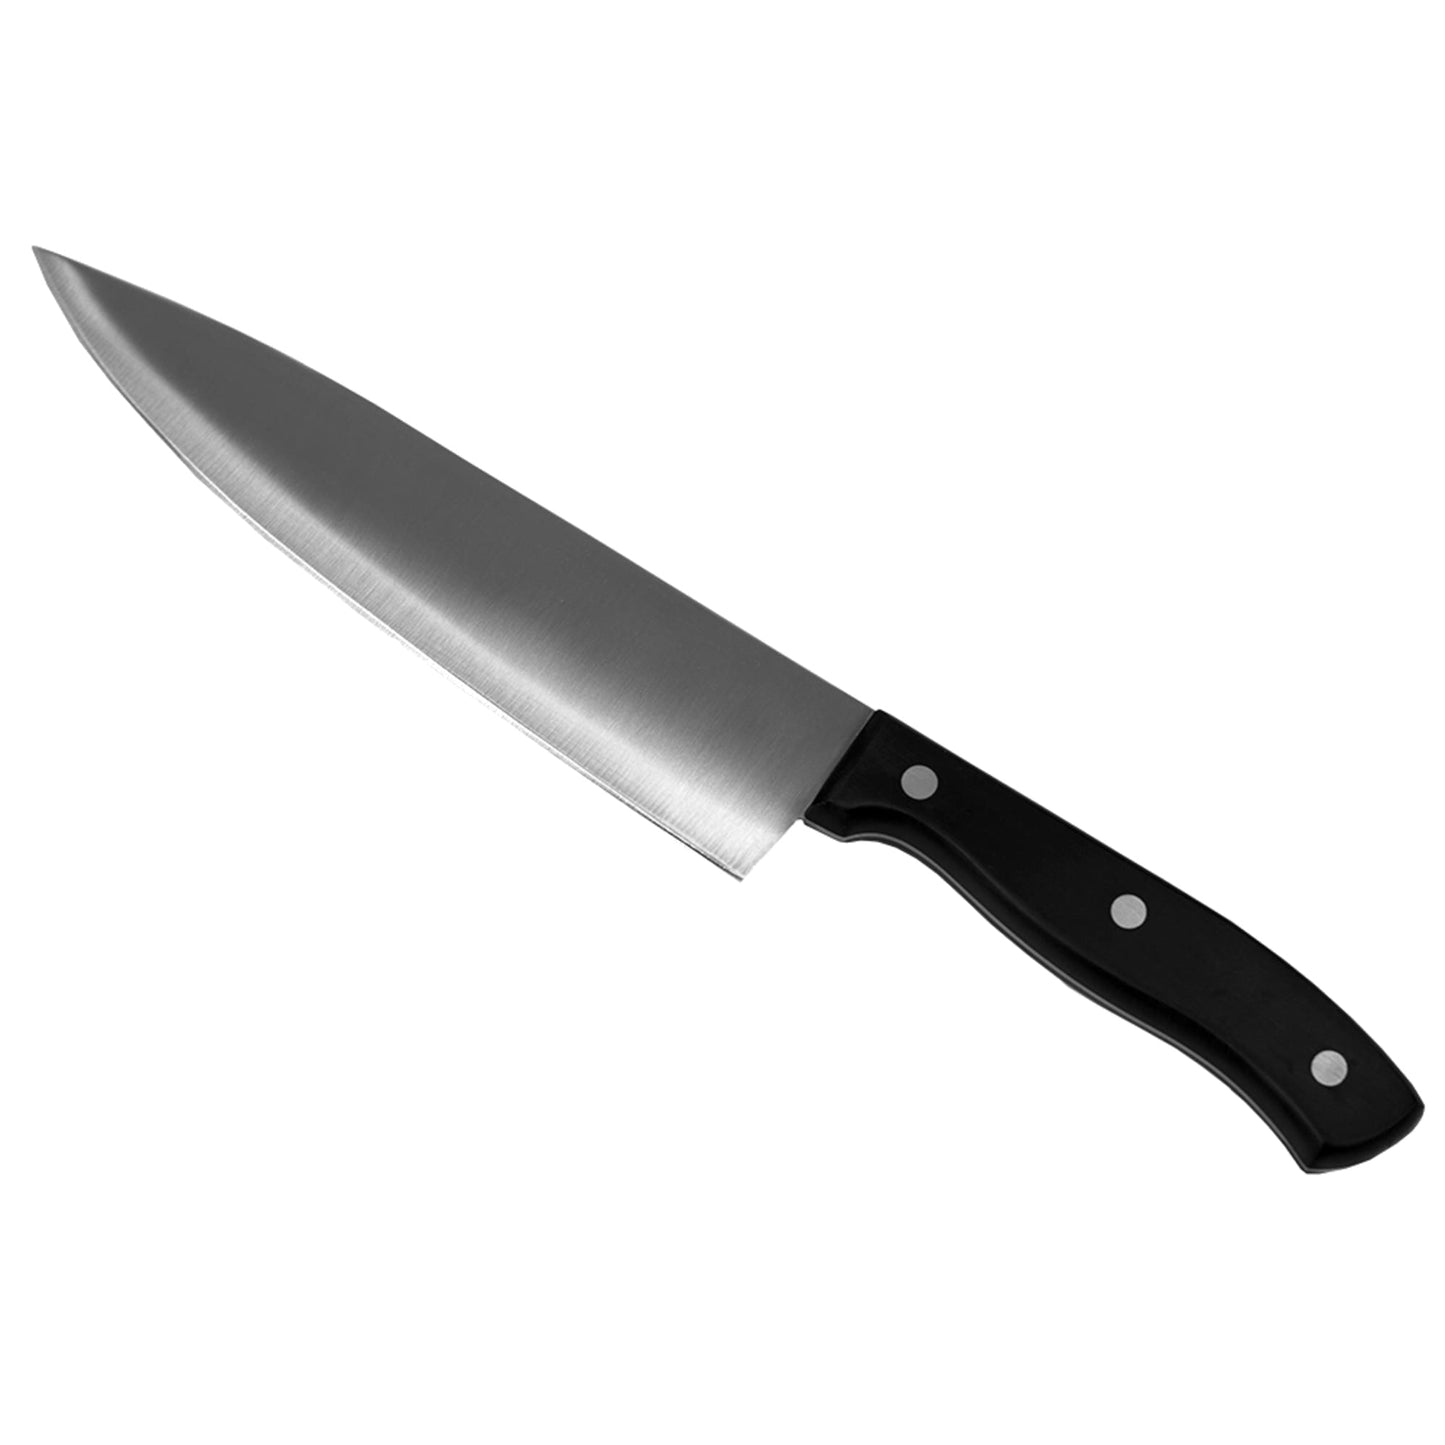 8" Stainless Steel Chef Knife with Contoured Bakelite Handle, Black